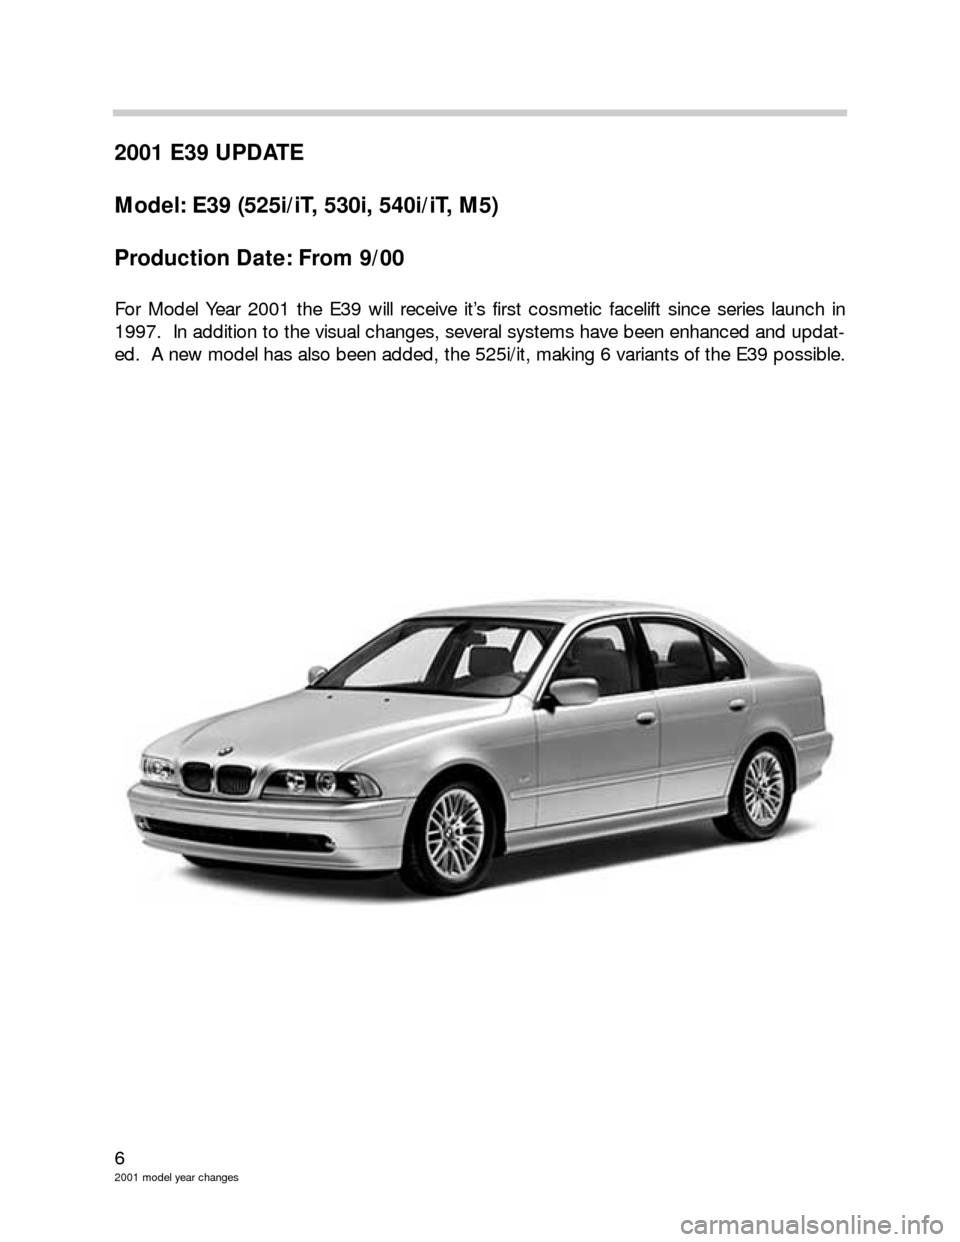 BMW 3 SERIES 2004 E46 Model Yar Changes 6
2001 model year changes
2001 E39 UPDATE
Model: E39 (525i/iT, 530i, 540i/iT, M5)
Production Date: From 9/00
For Model Year 2001 the E39 will receive it’s first cosmetic facelift since series launch